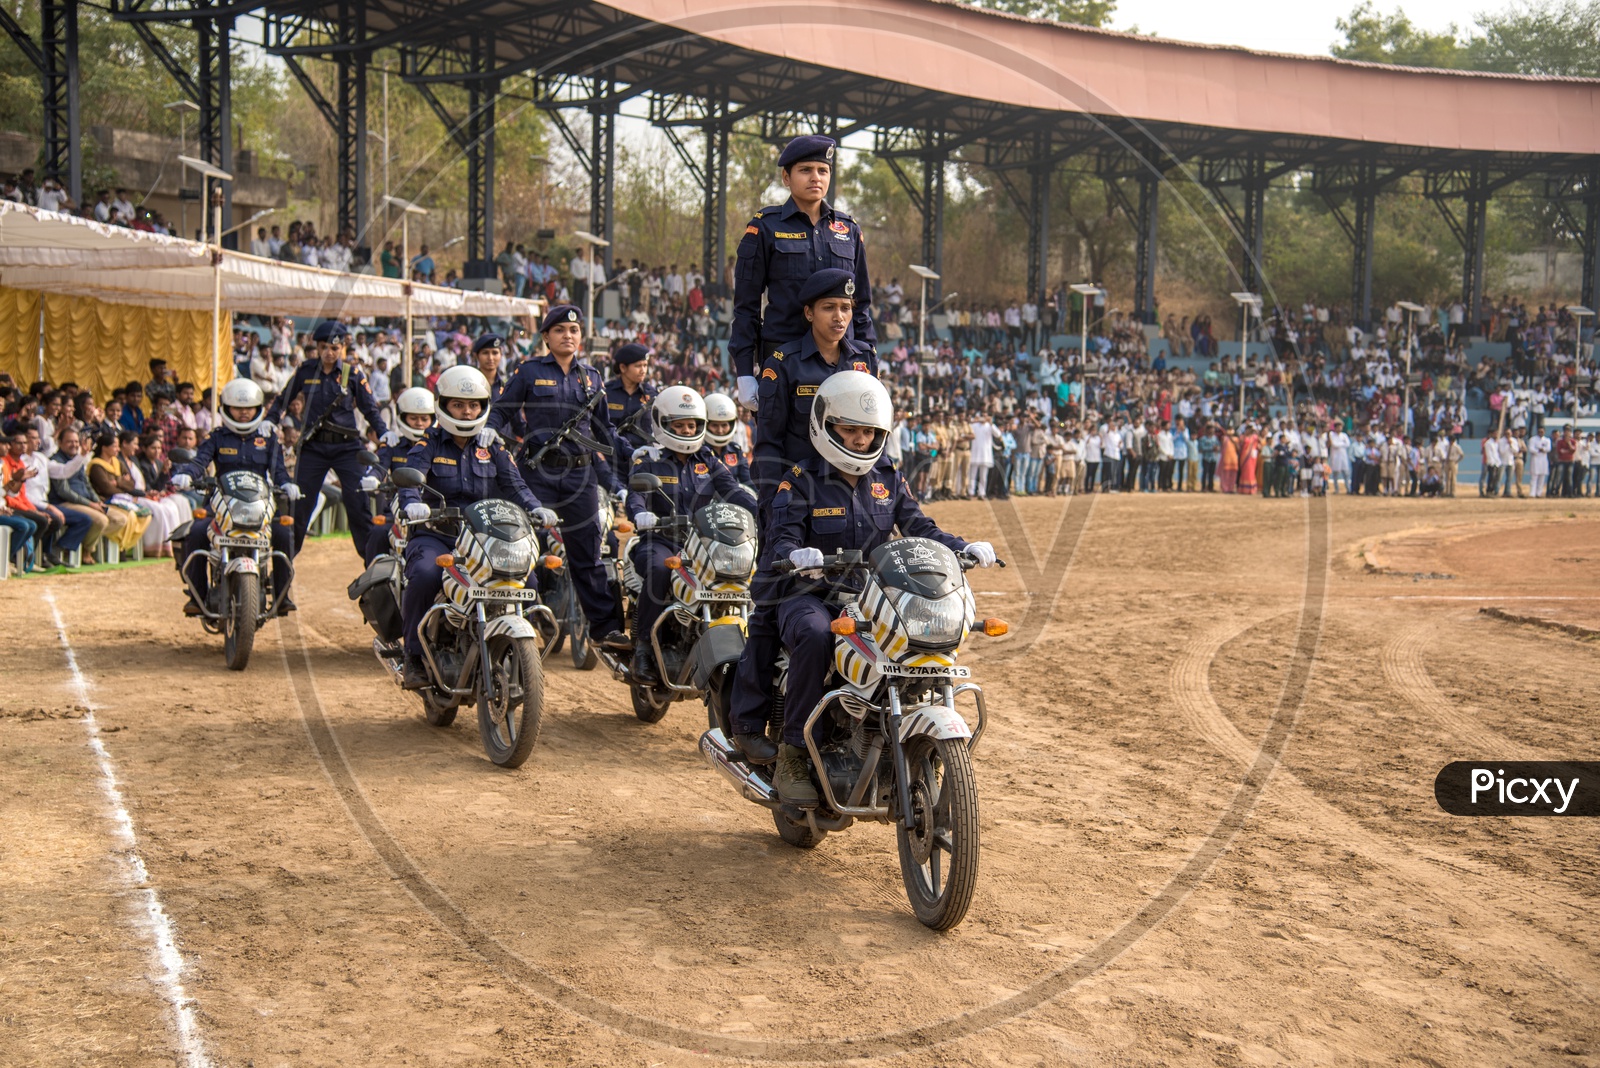 Woman Commando Cadets Doing Stunts With Bikes in Independence Day Parade